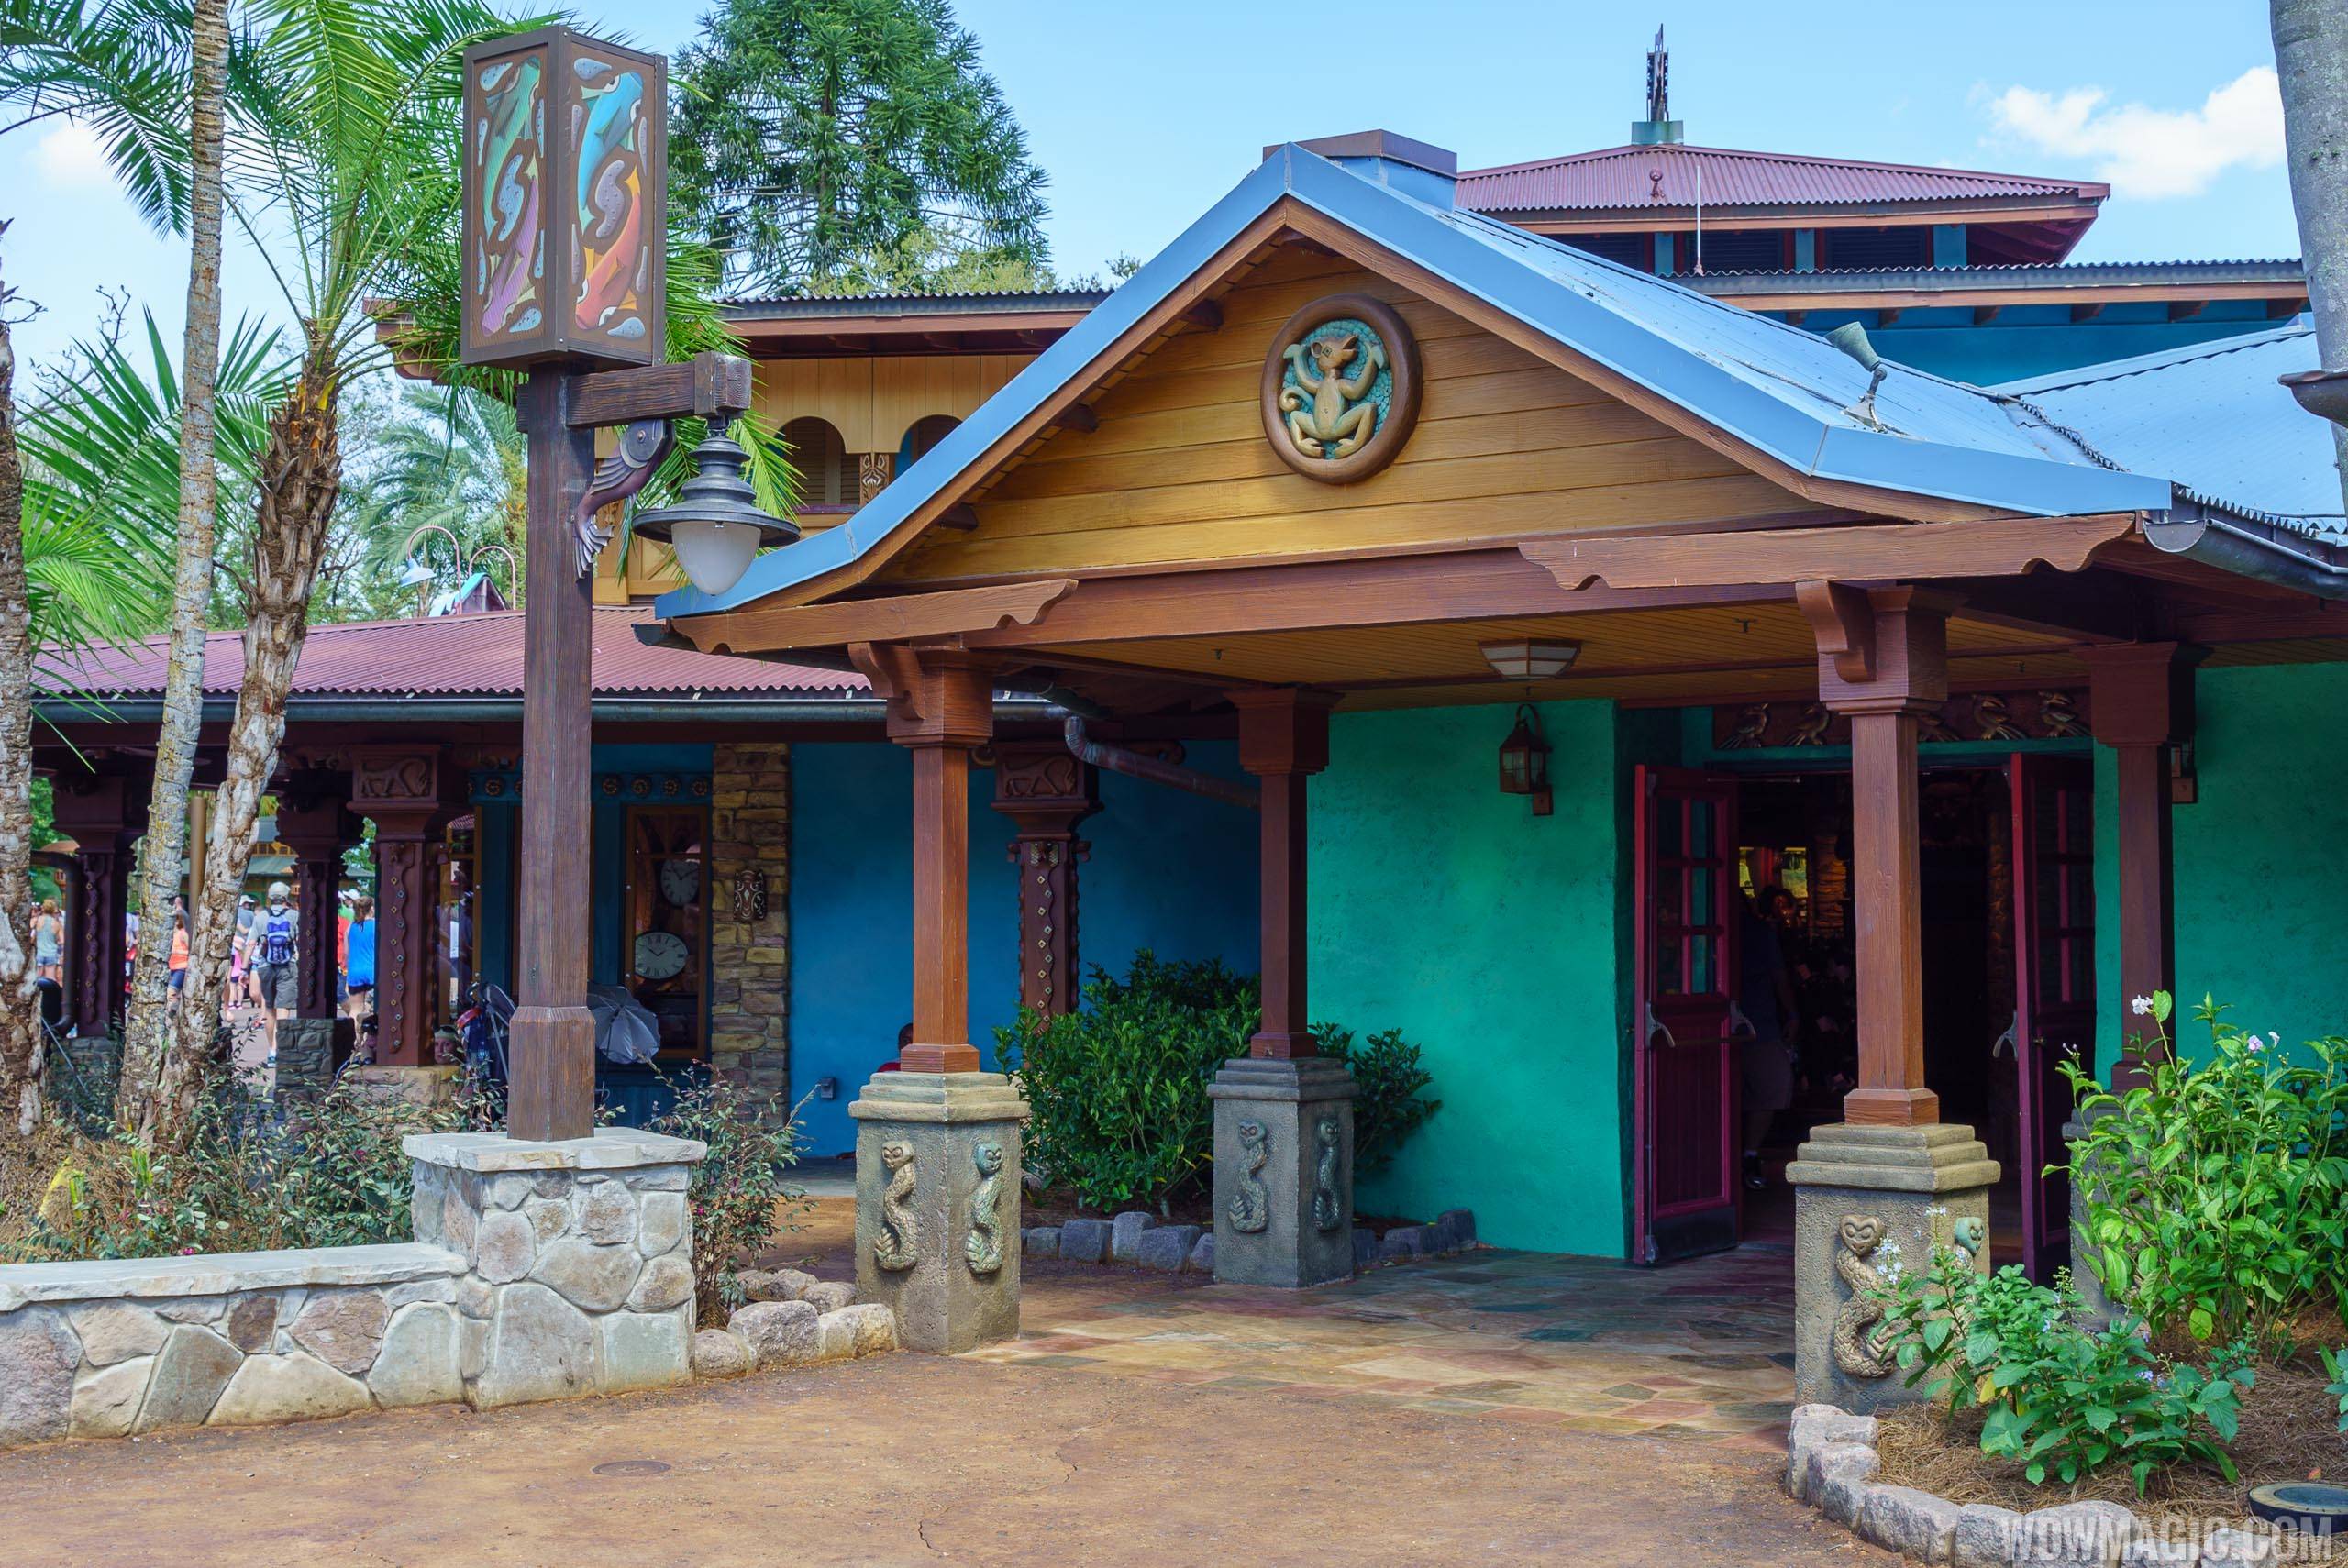 PHOTOS - Discovery Trading Company takes over from Disney Outfitters at Disney's Animal Kingdom